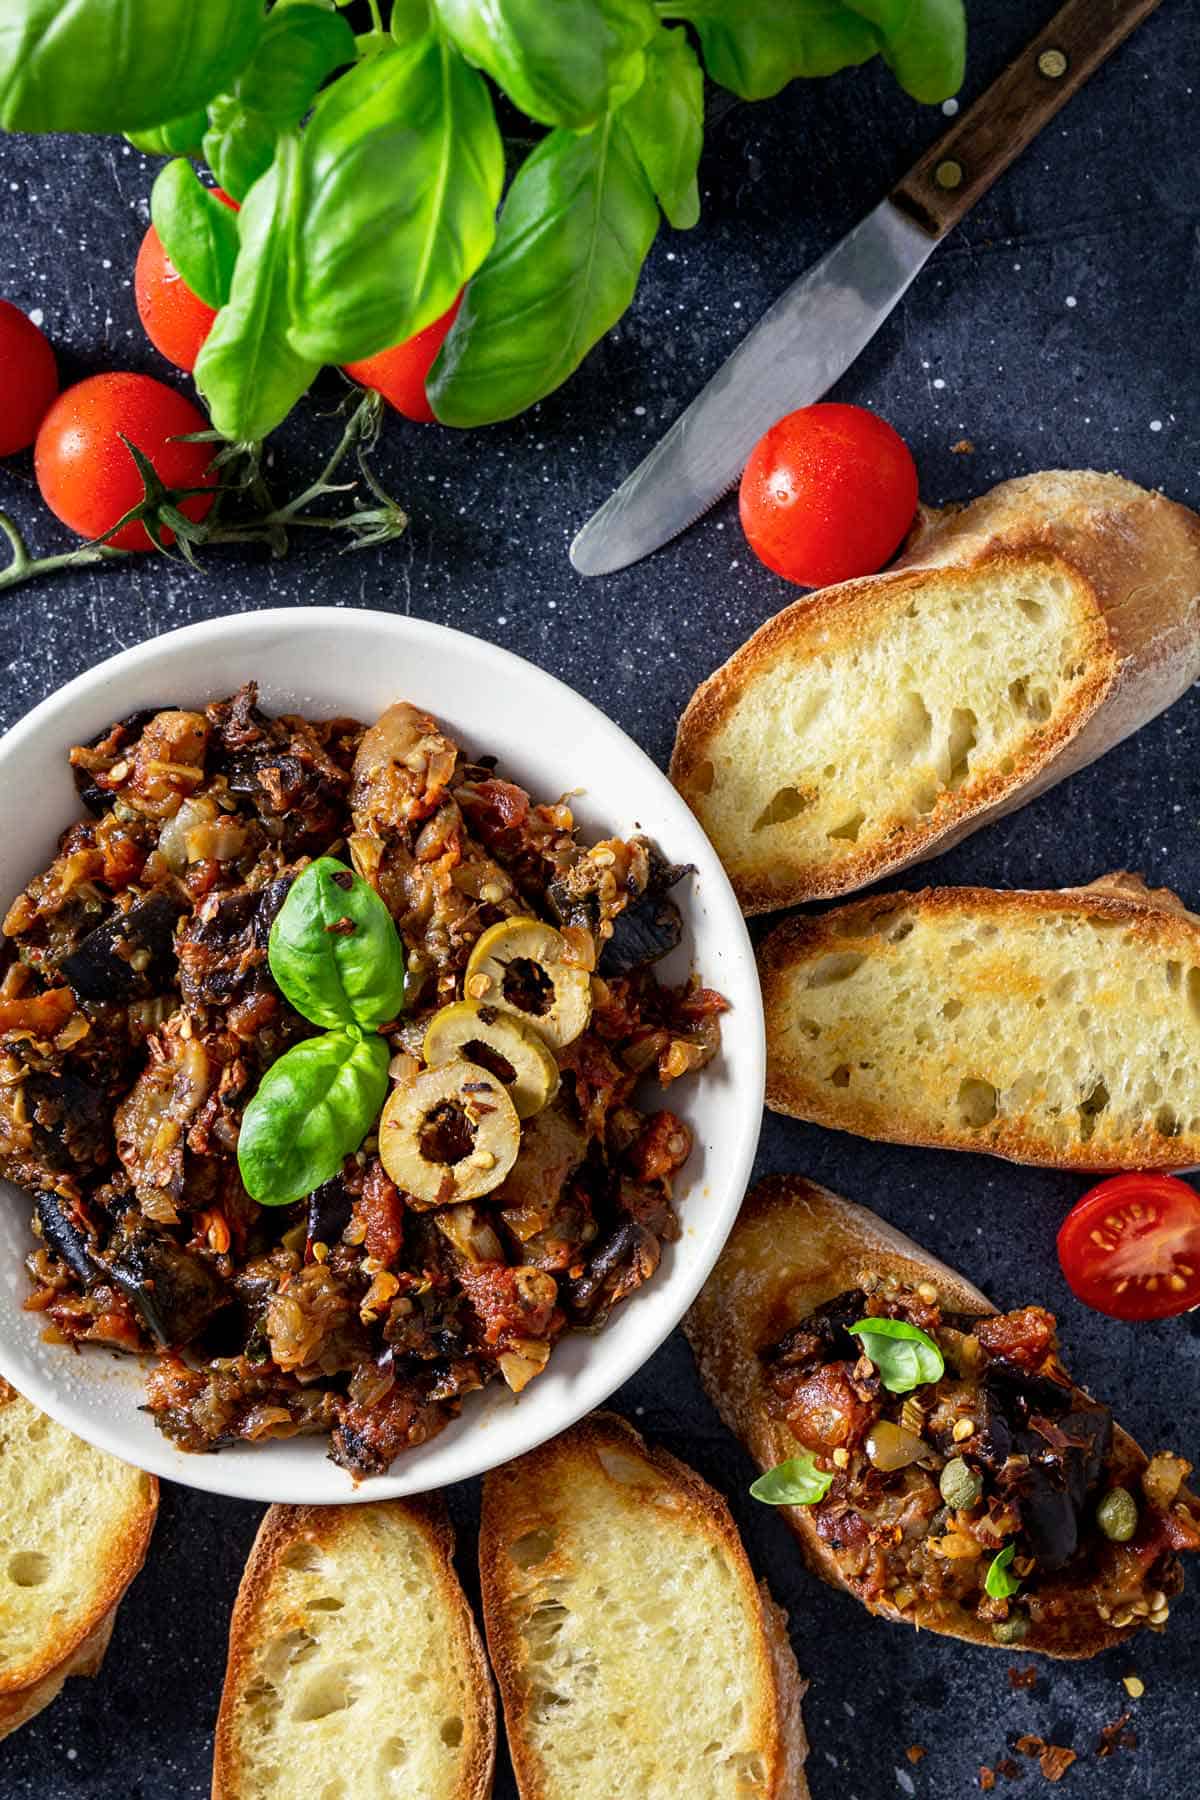 Toasted bread with eggplant caponata appetizer.